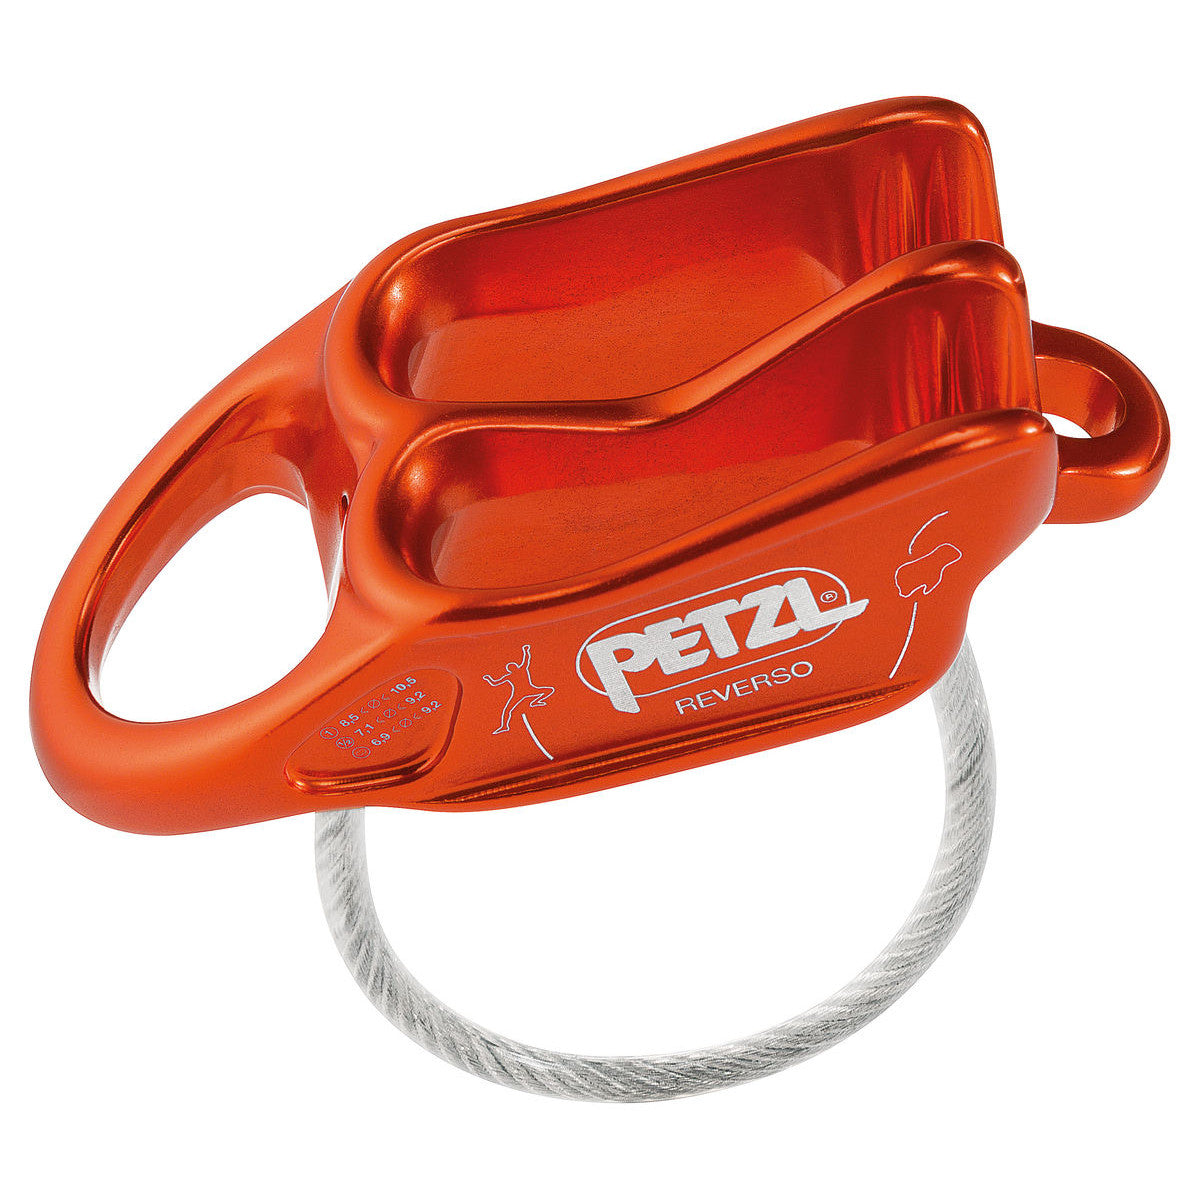 Petzl Reverso belay device, side view shown in red colour 